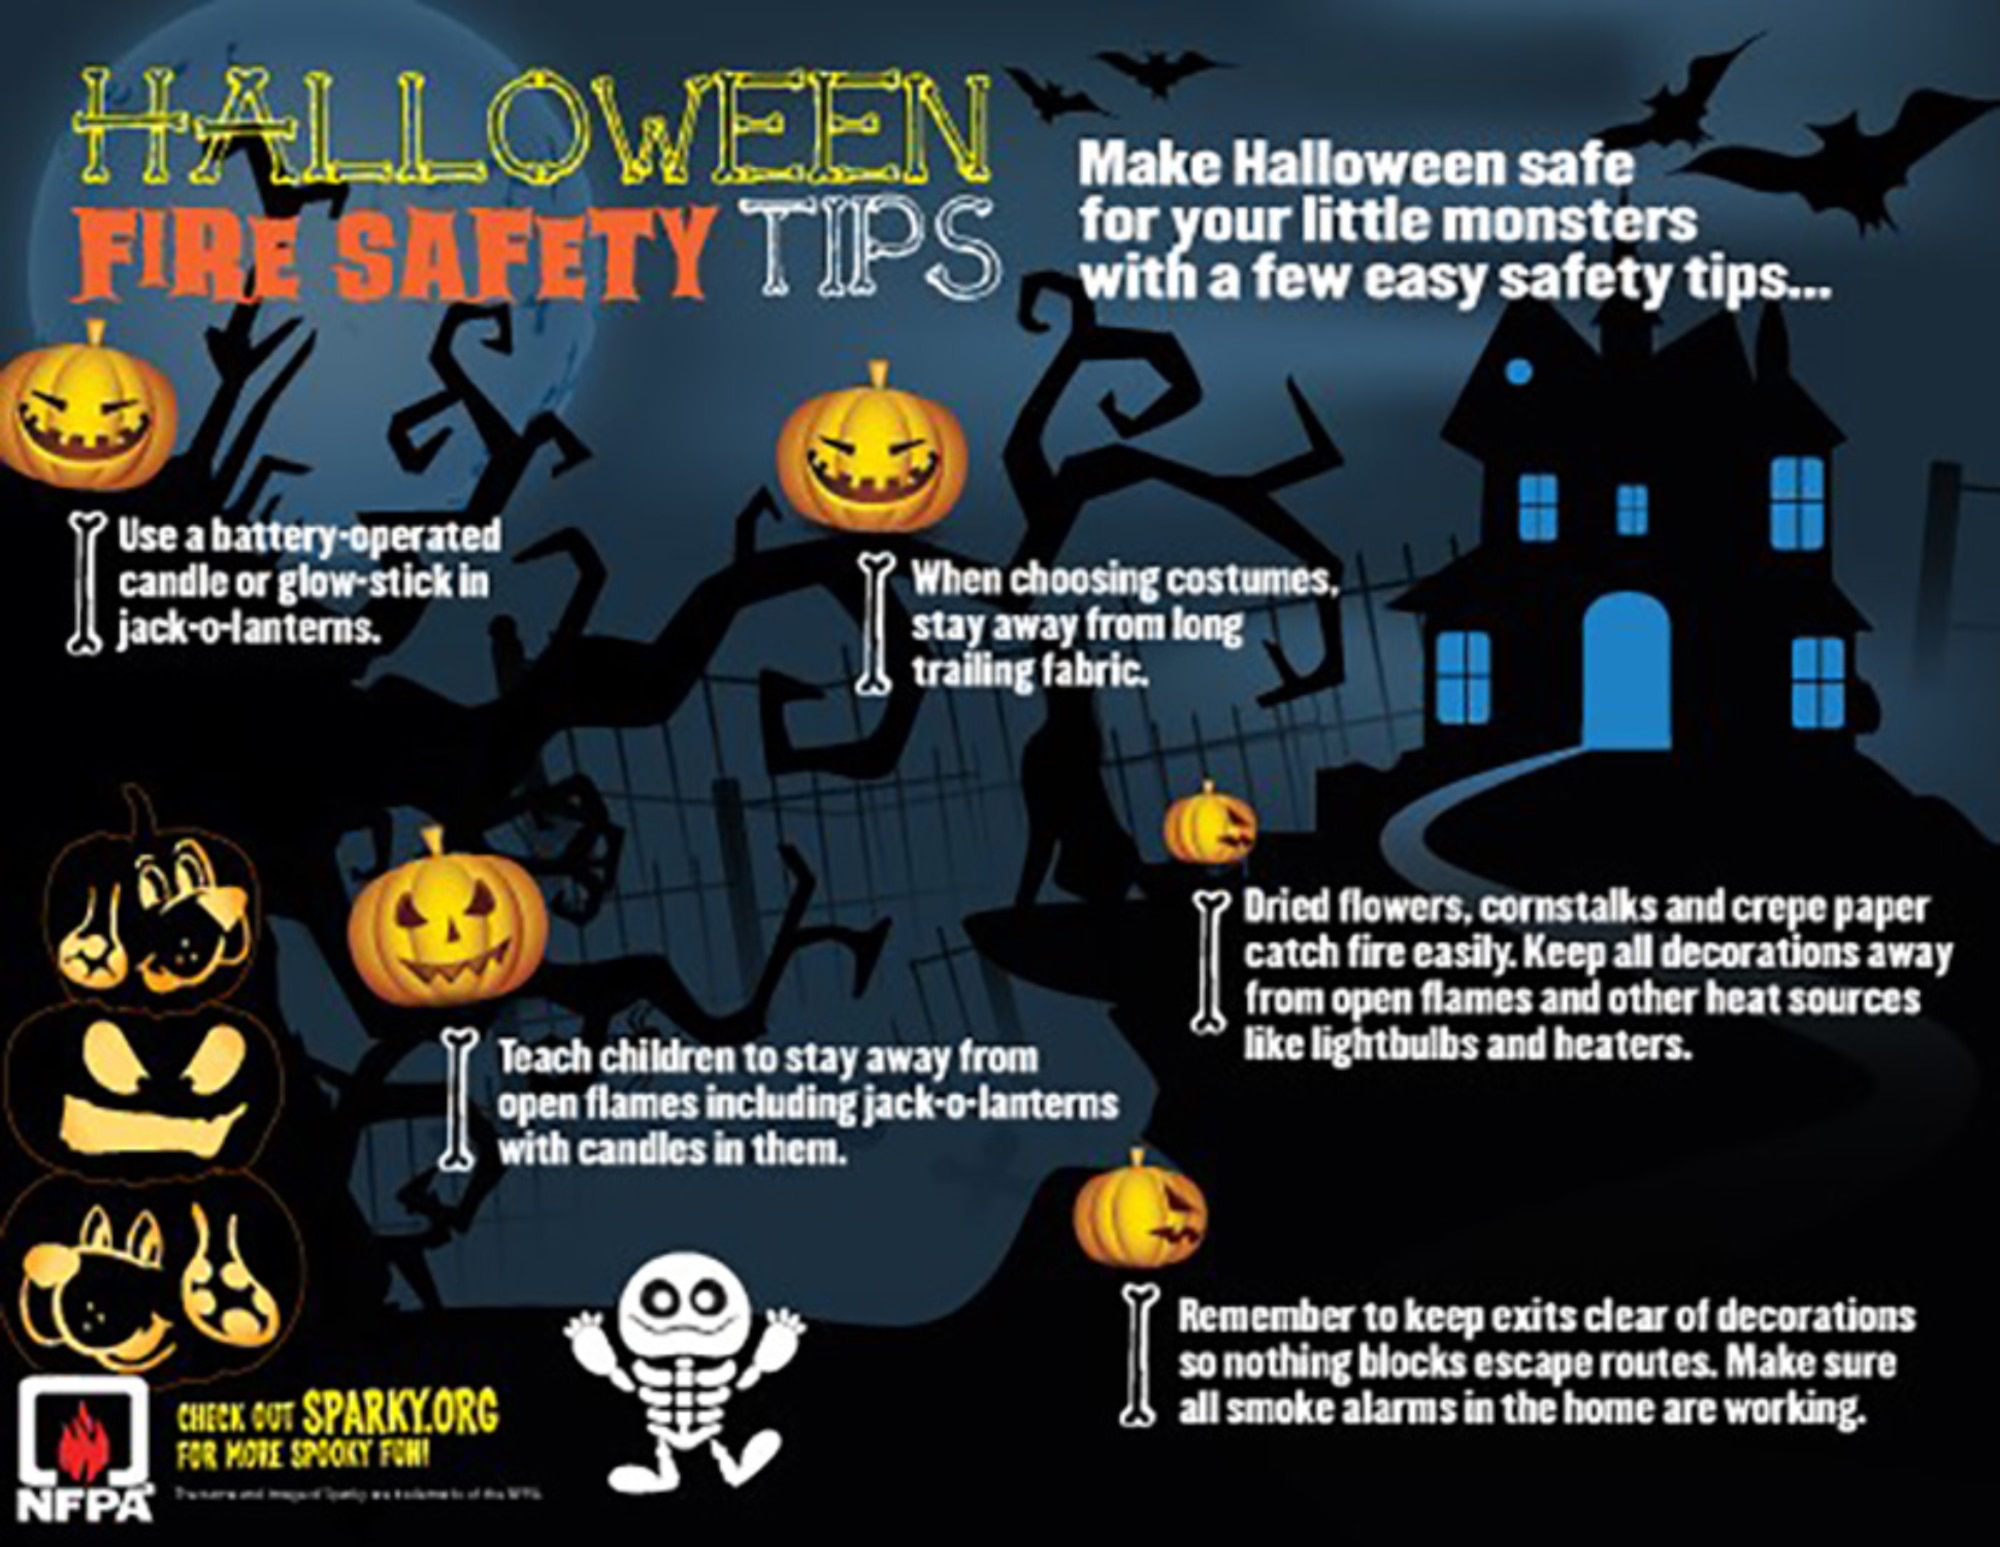 Be safe and don’t have a scary Halloween